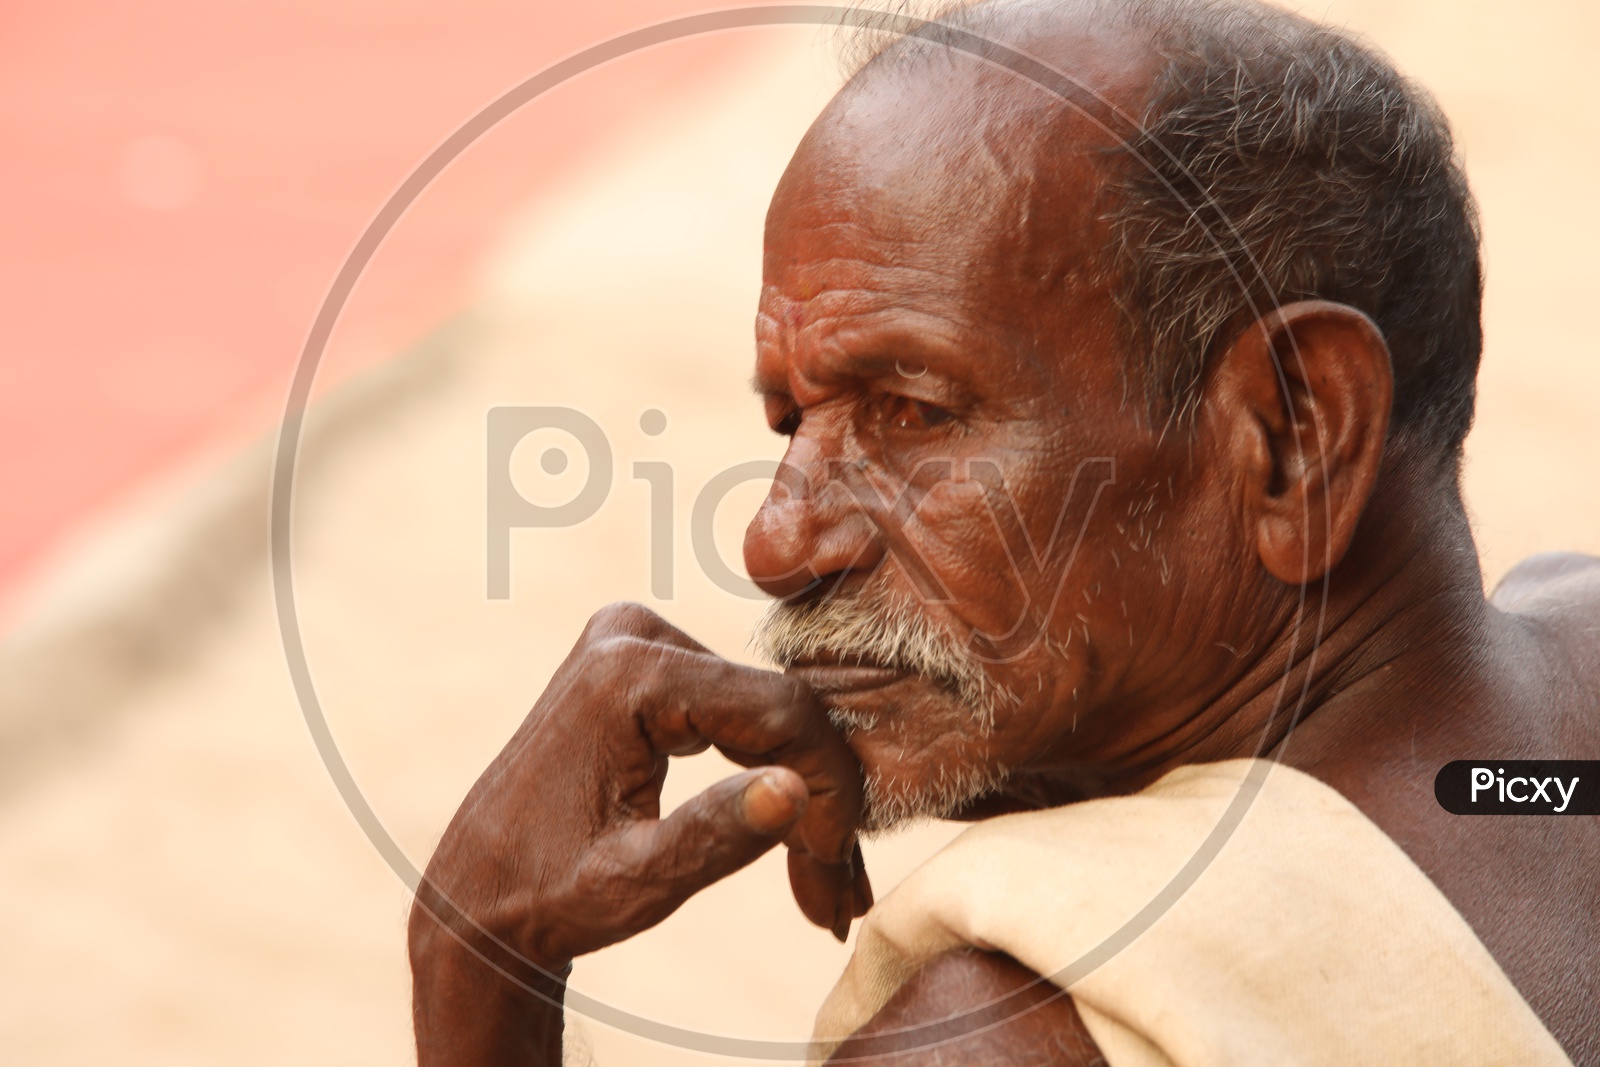 Photograph of old man face / People Face